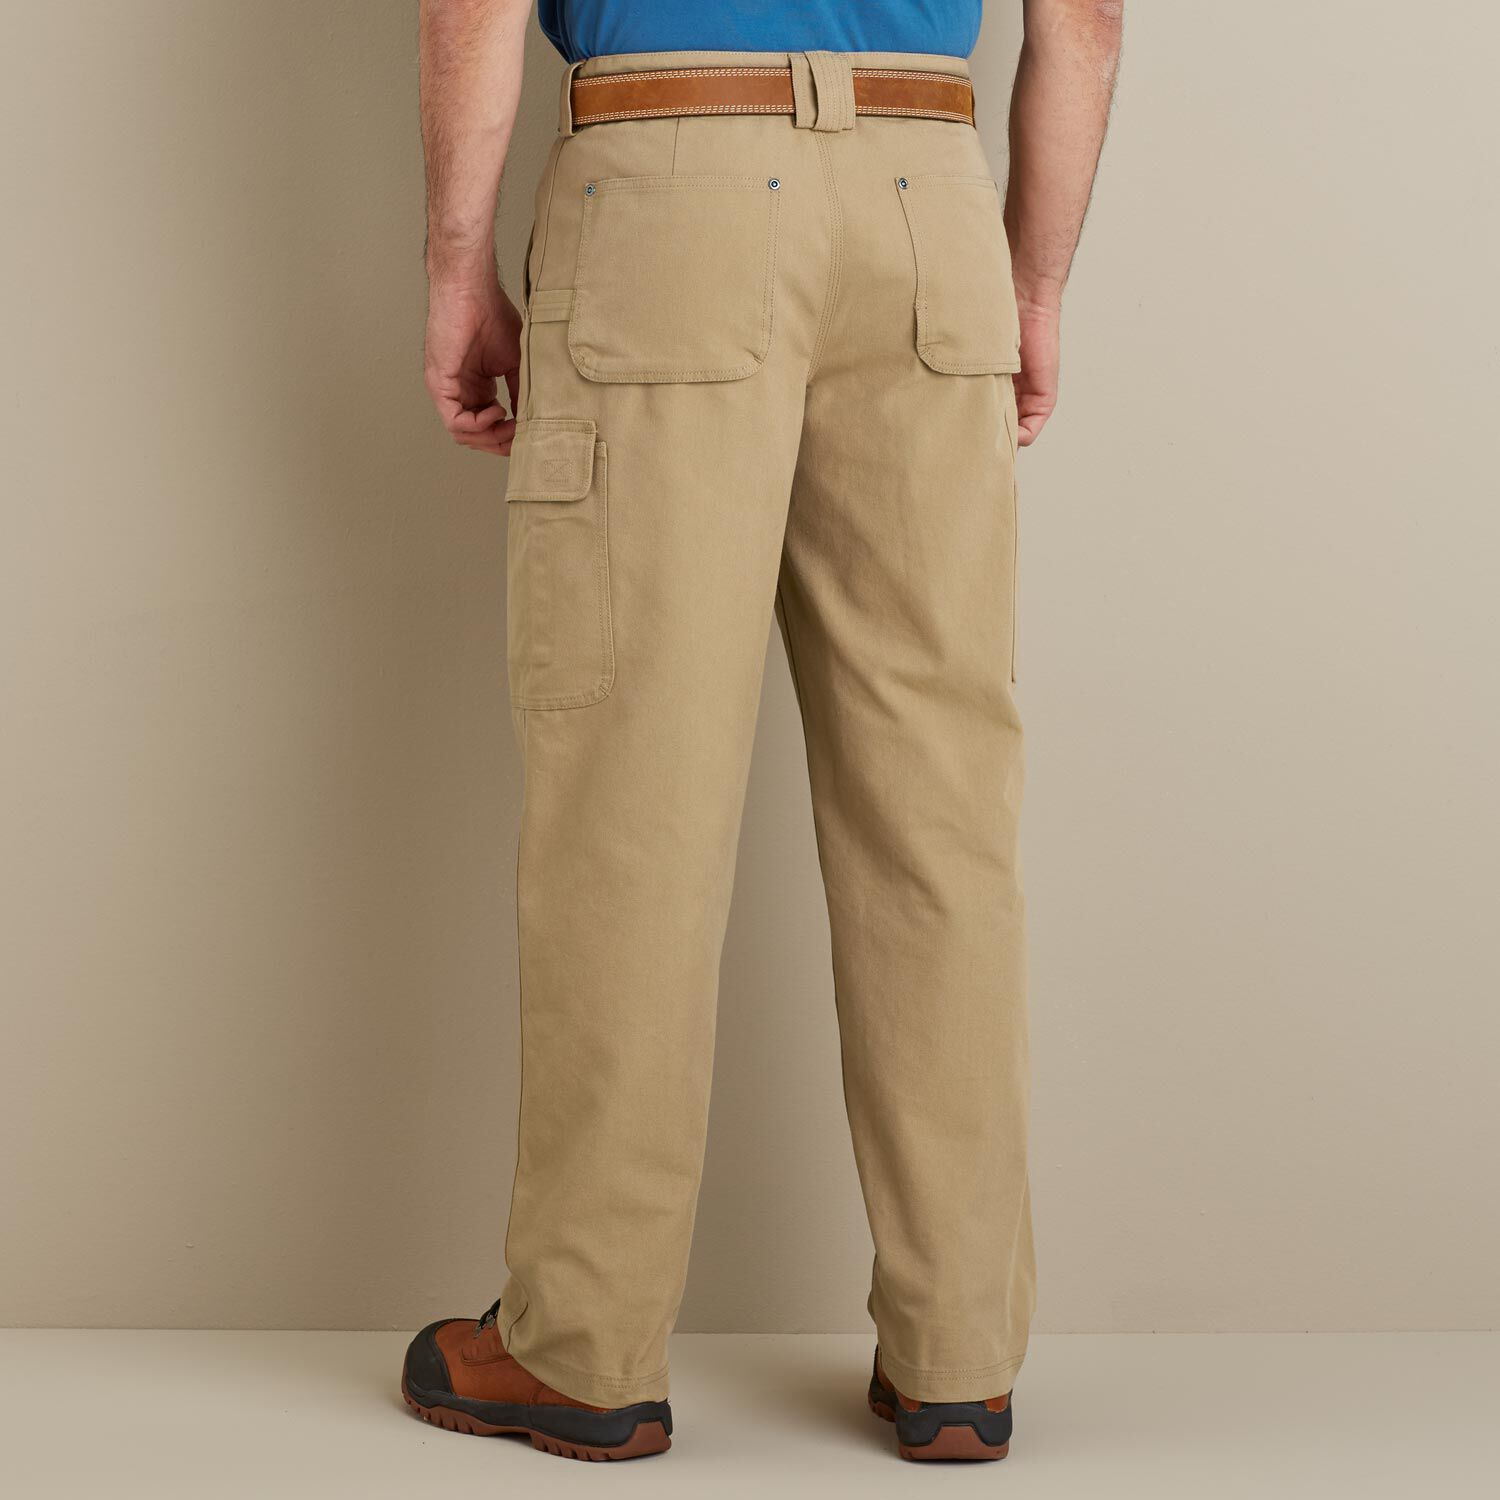 Mens CoolDry Fire Hose Summer Work Pants  Duluth Trading Company